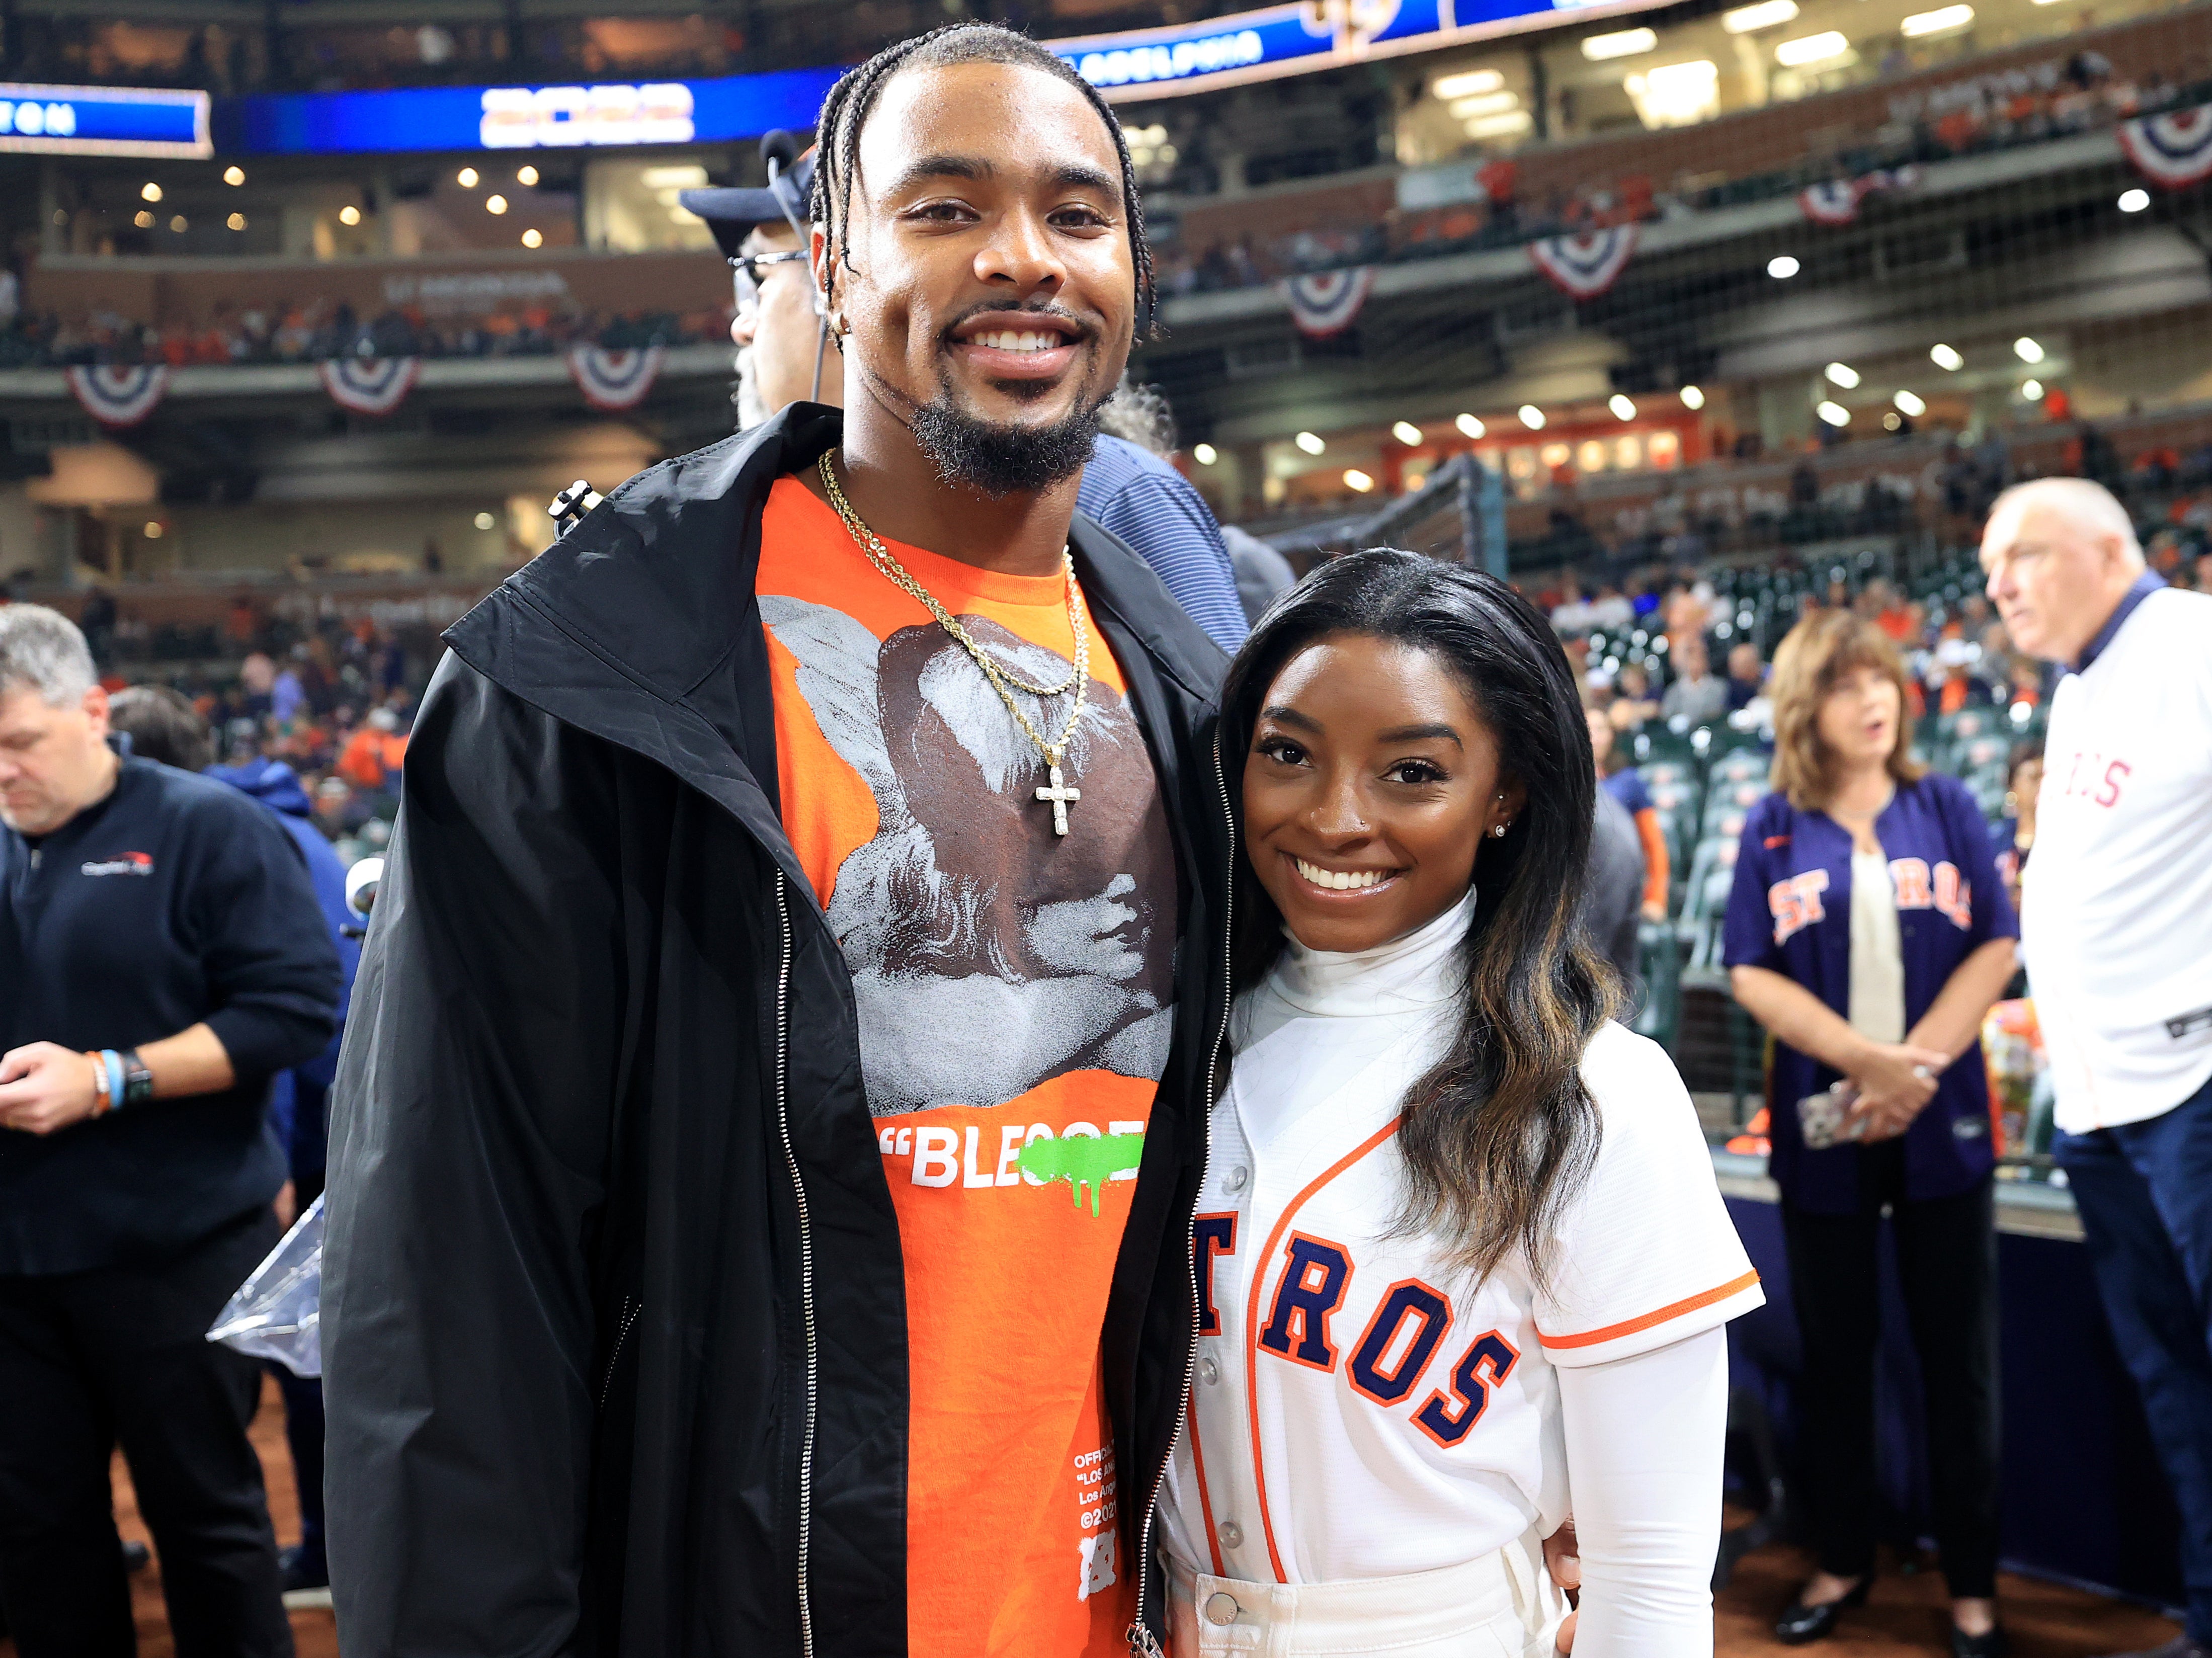 Simone Biles and Jonathan Owens pose on the field prior to Game One of the 2022 World Series between the Philadelphia Phillies and the Houston Astros at Minute Maid Park on 28 October 2022 in Houston, Texas